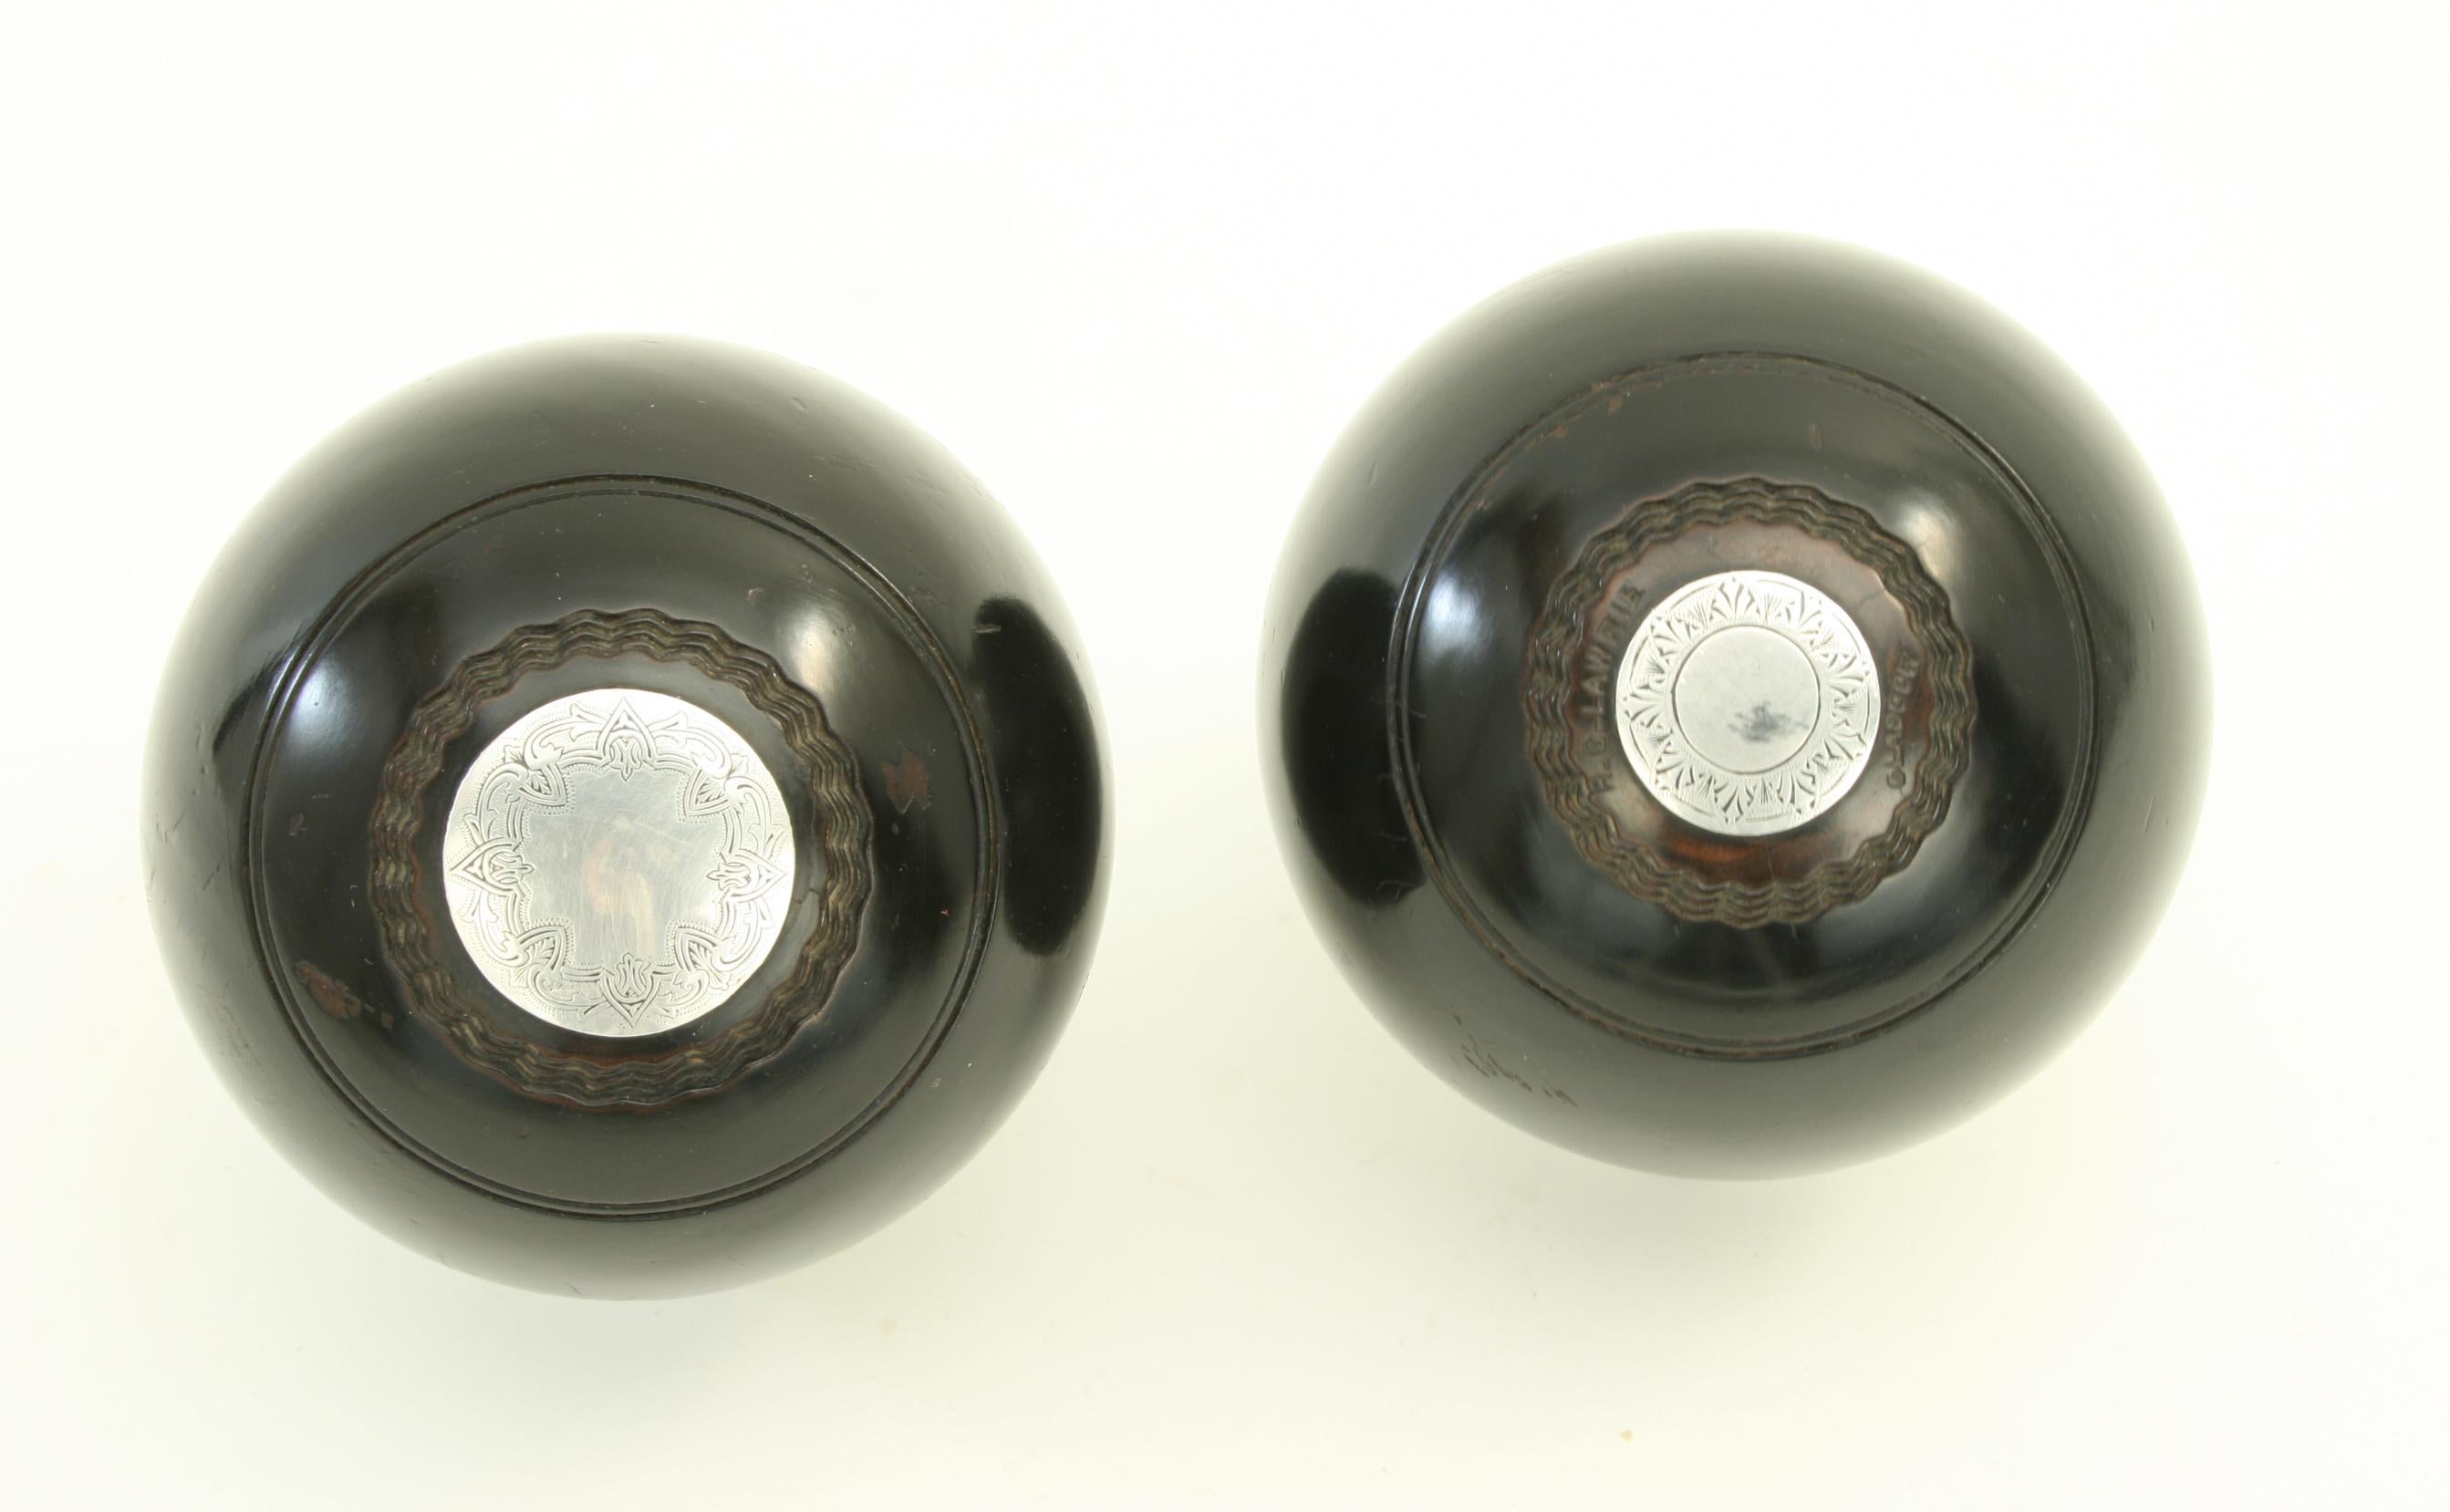 Lignum Vitae presentation lawn bowls.
A very nice pair of miniature Victorian ebonized lignum vitae presentation lawn bowls with silvered plaques. The front discs are larger than the rear ones but all are engraved with a pattern around the outer